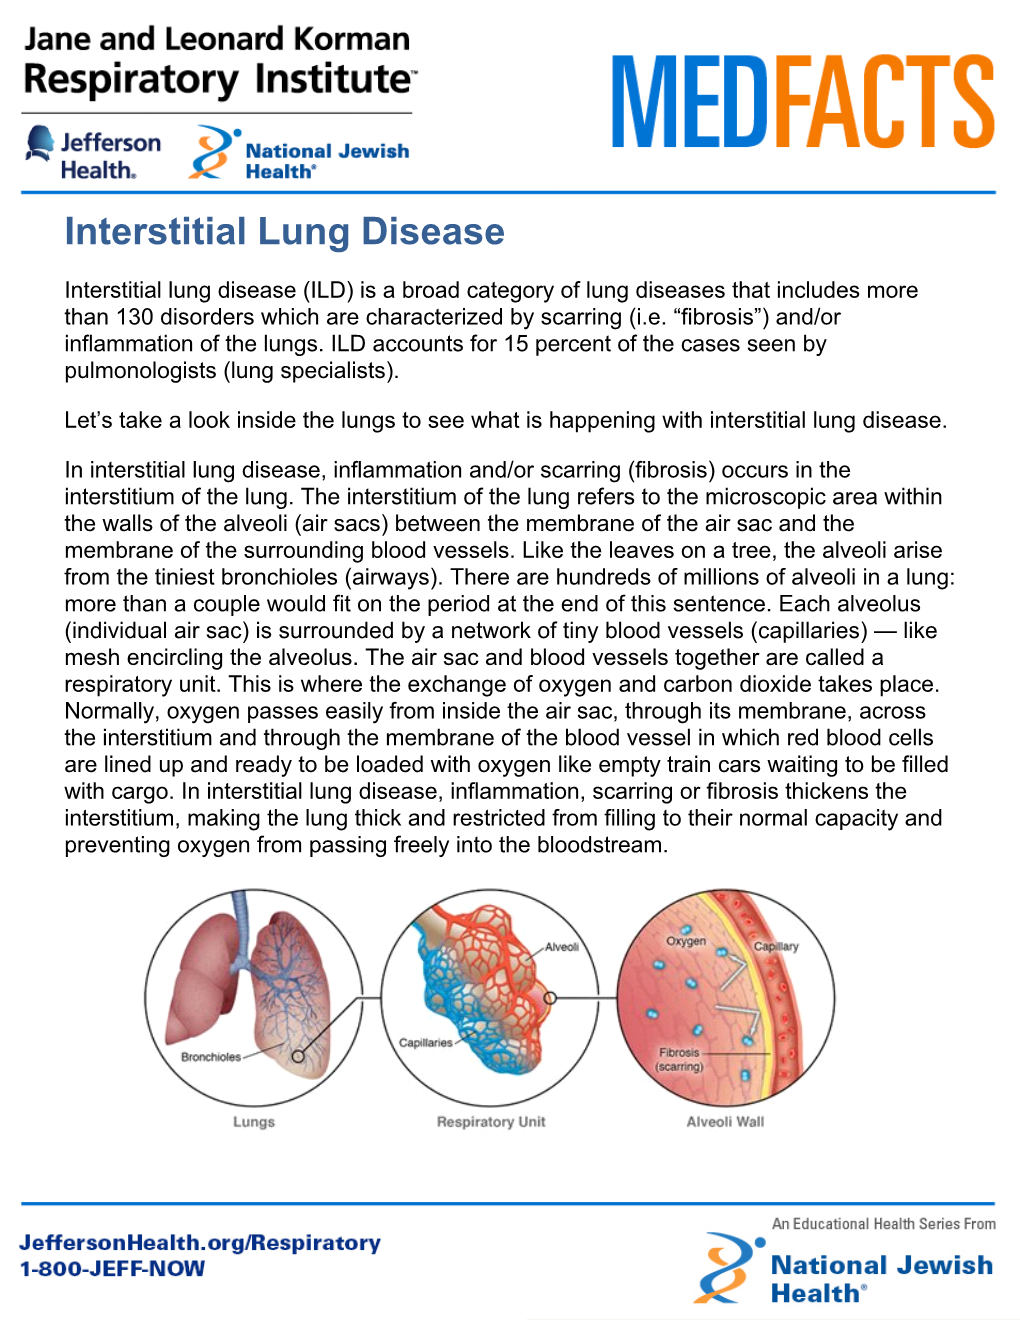 What Is Interstitial Lung Disease (ILD)?